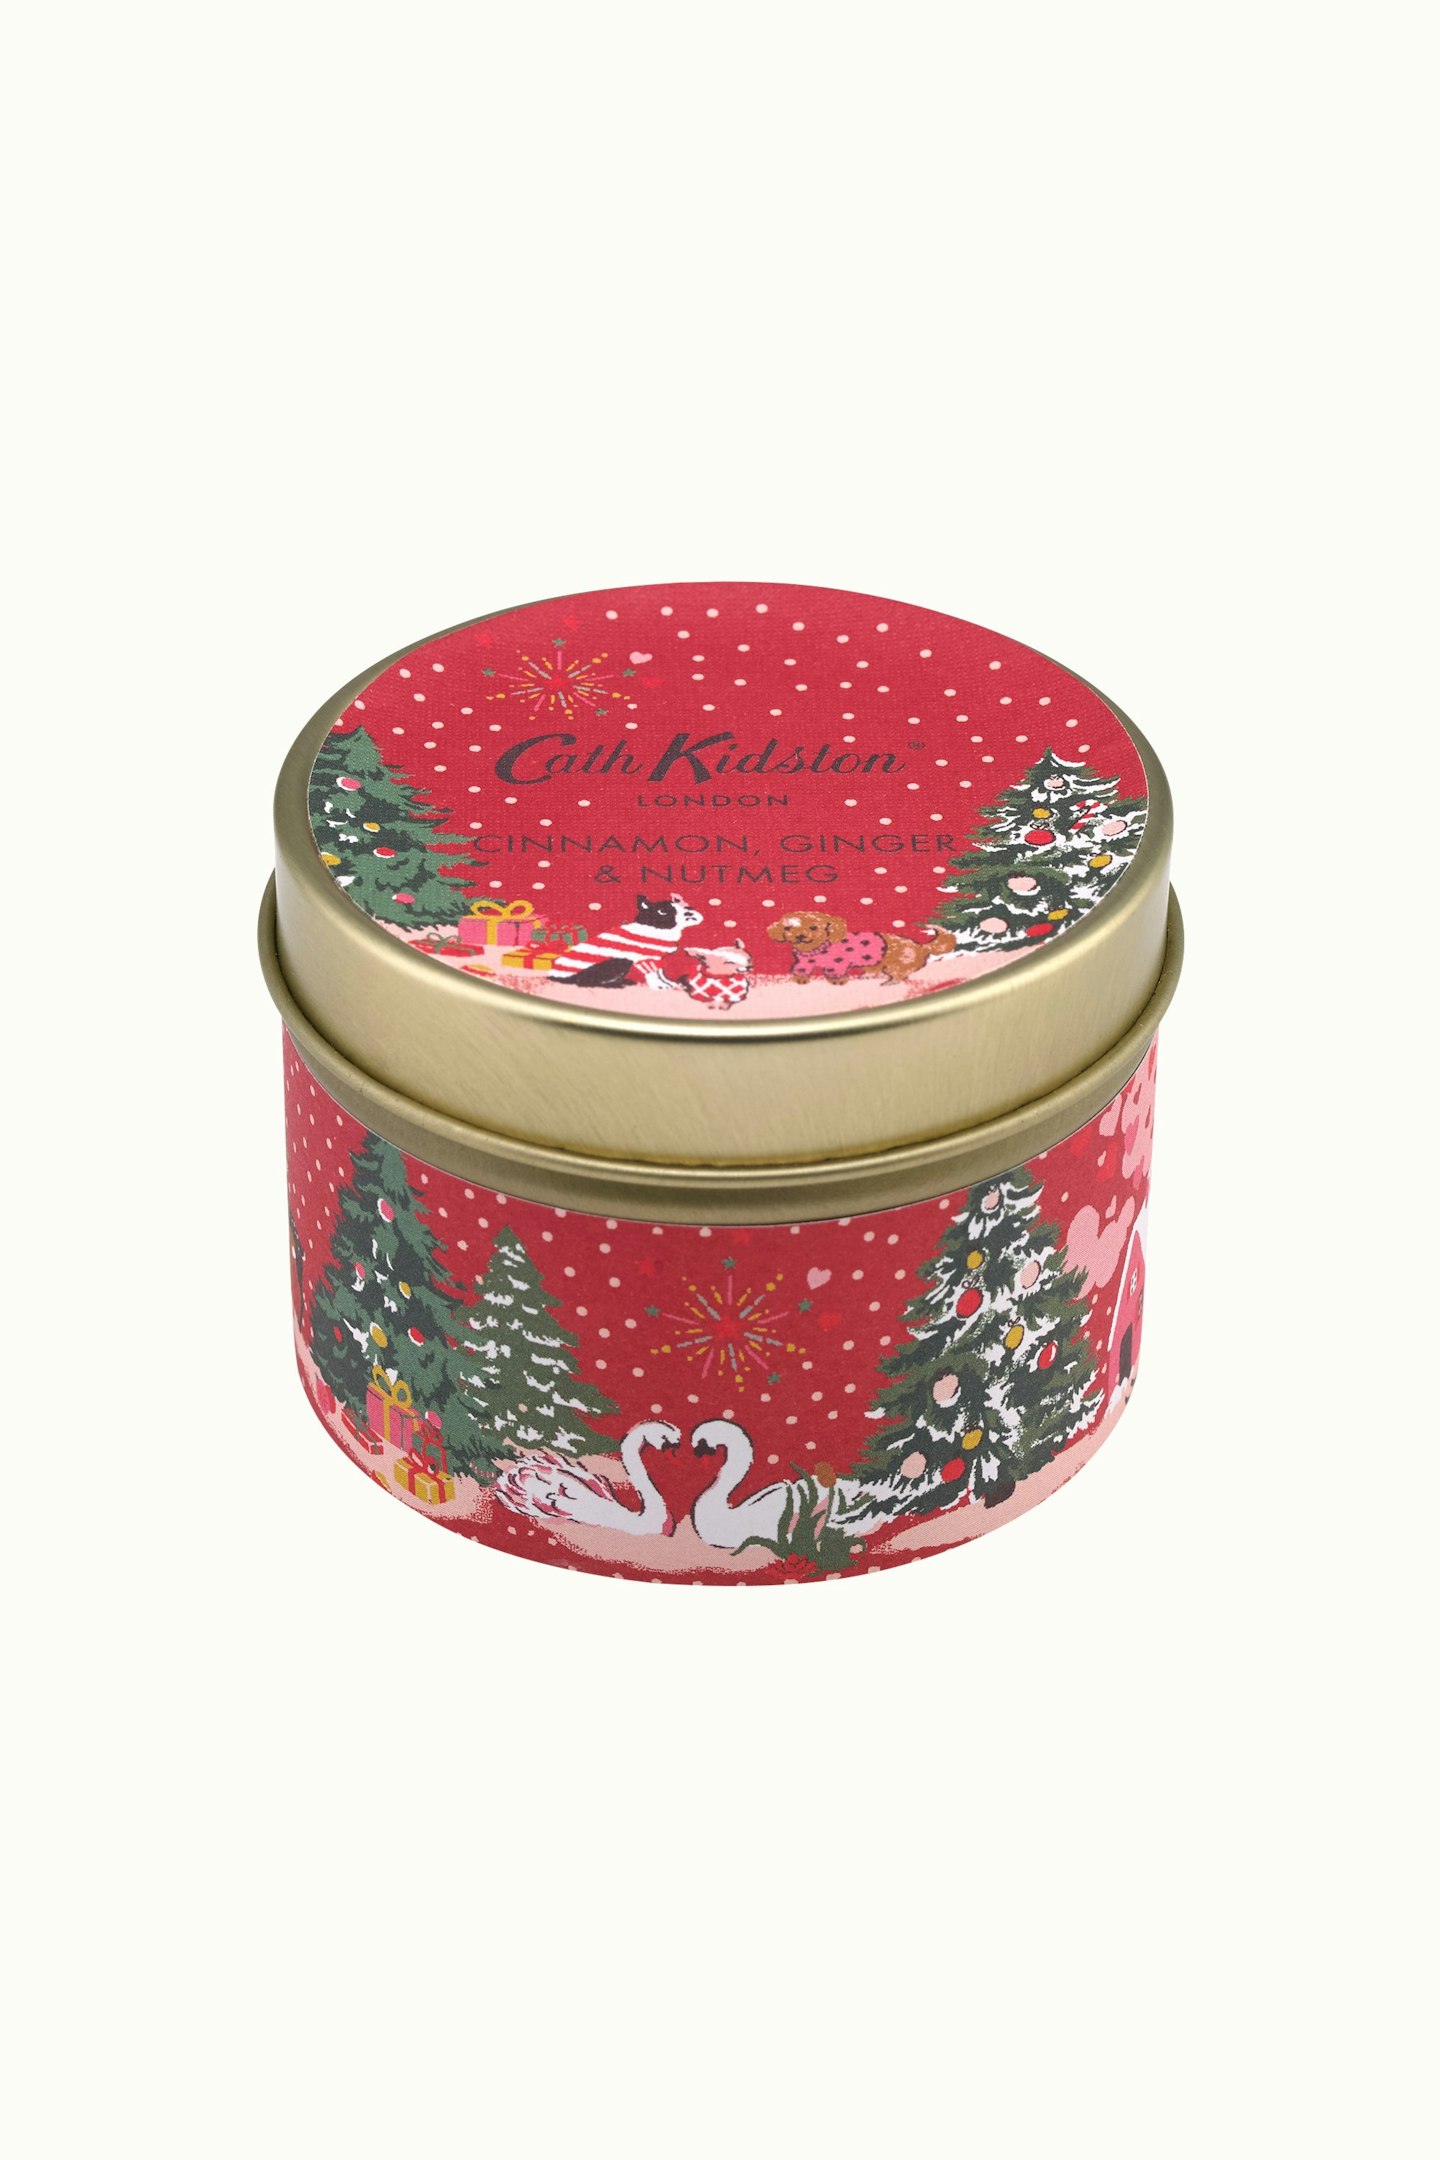 Cath Kidson, Shine Bright Christmas Wishes Tin Candle, £7